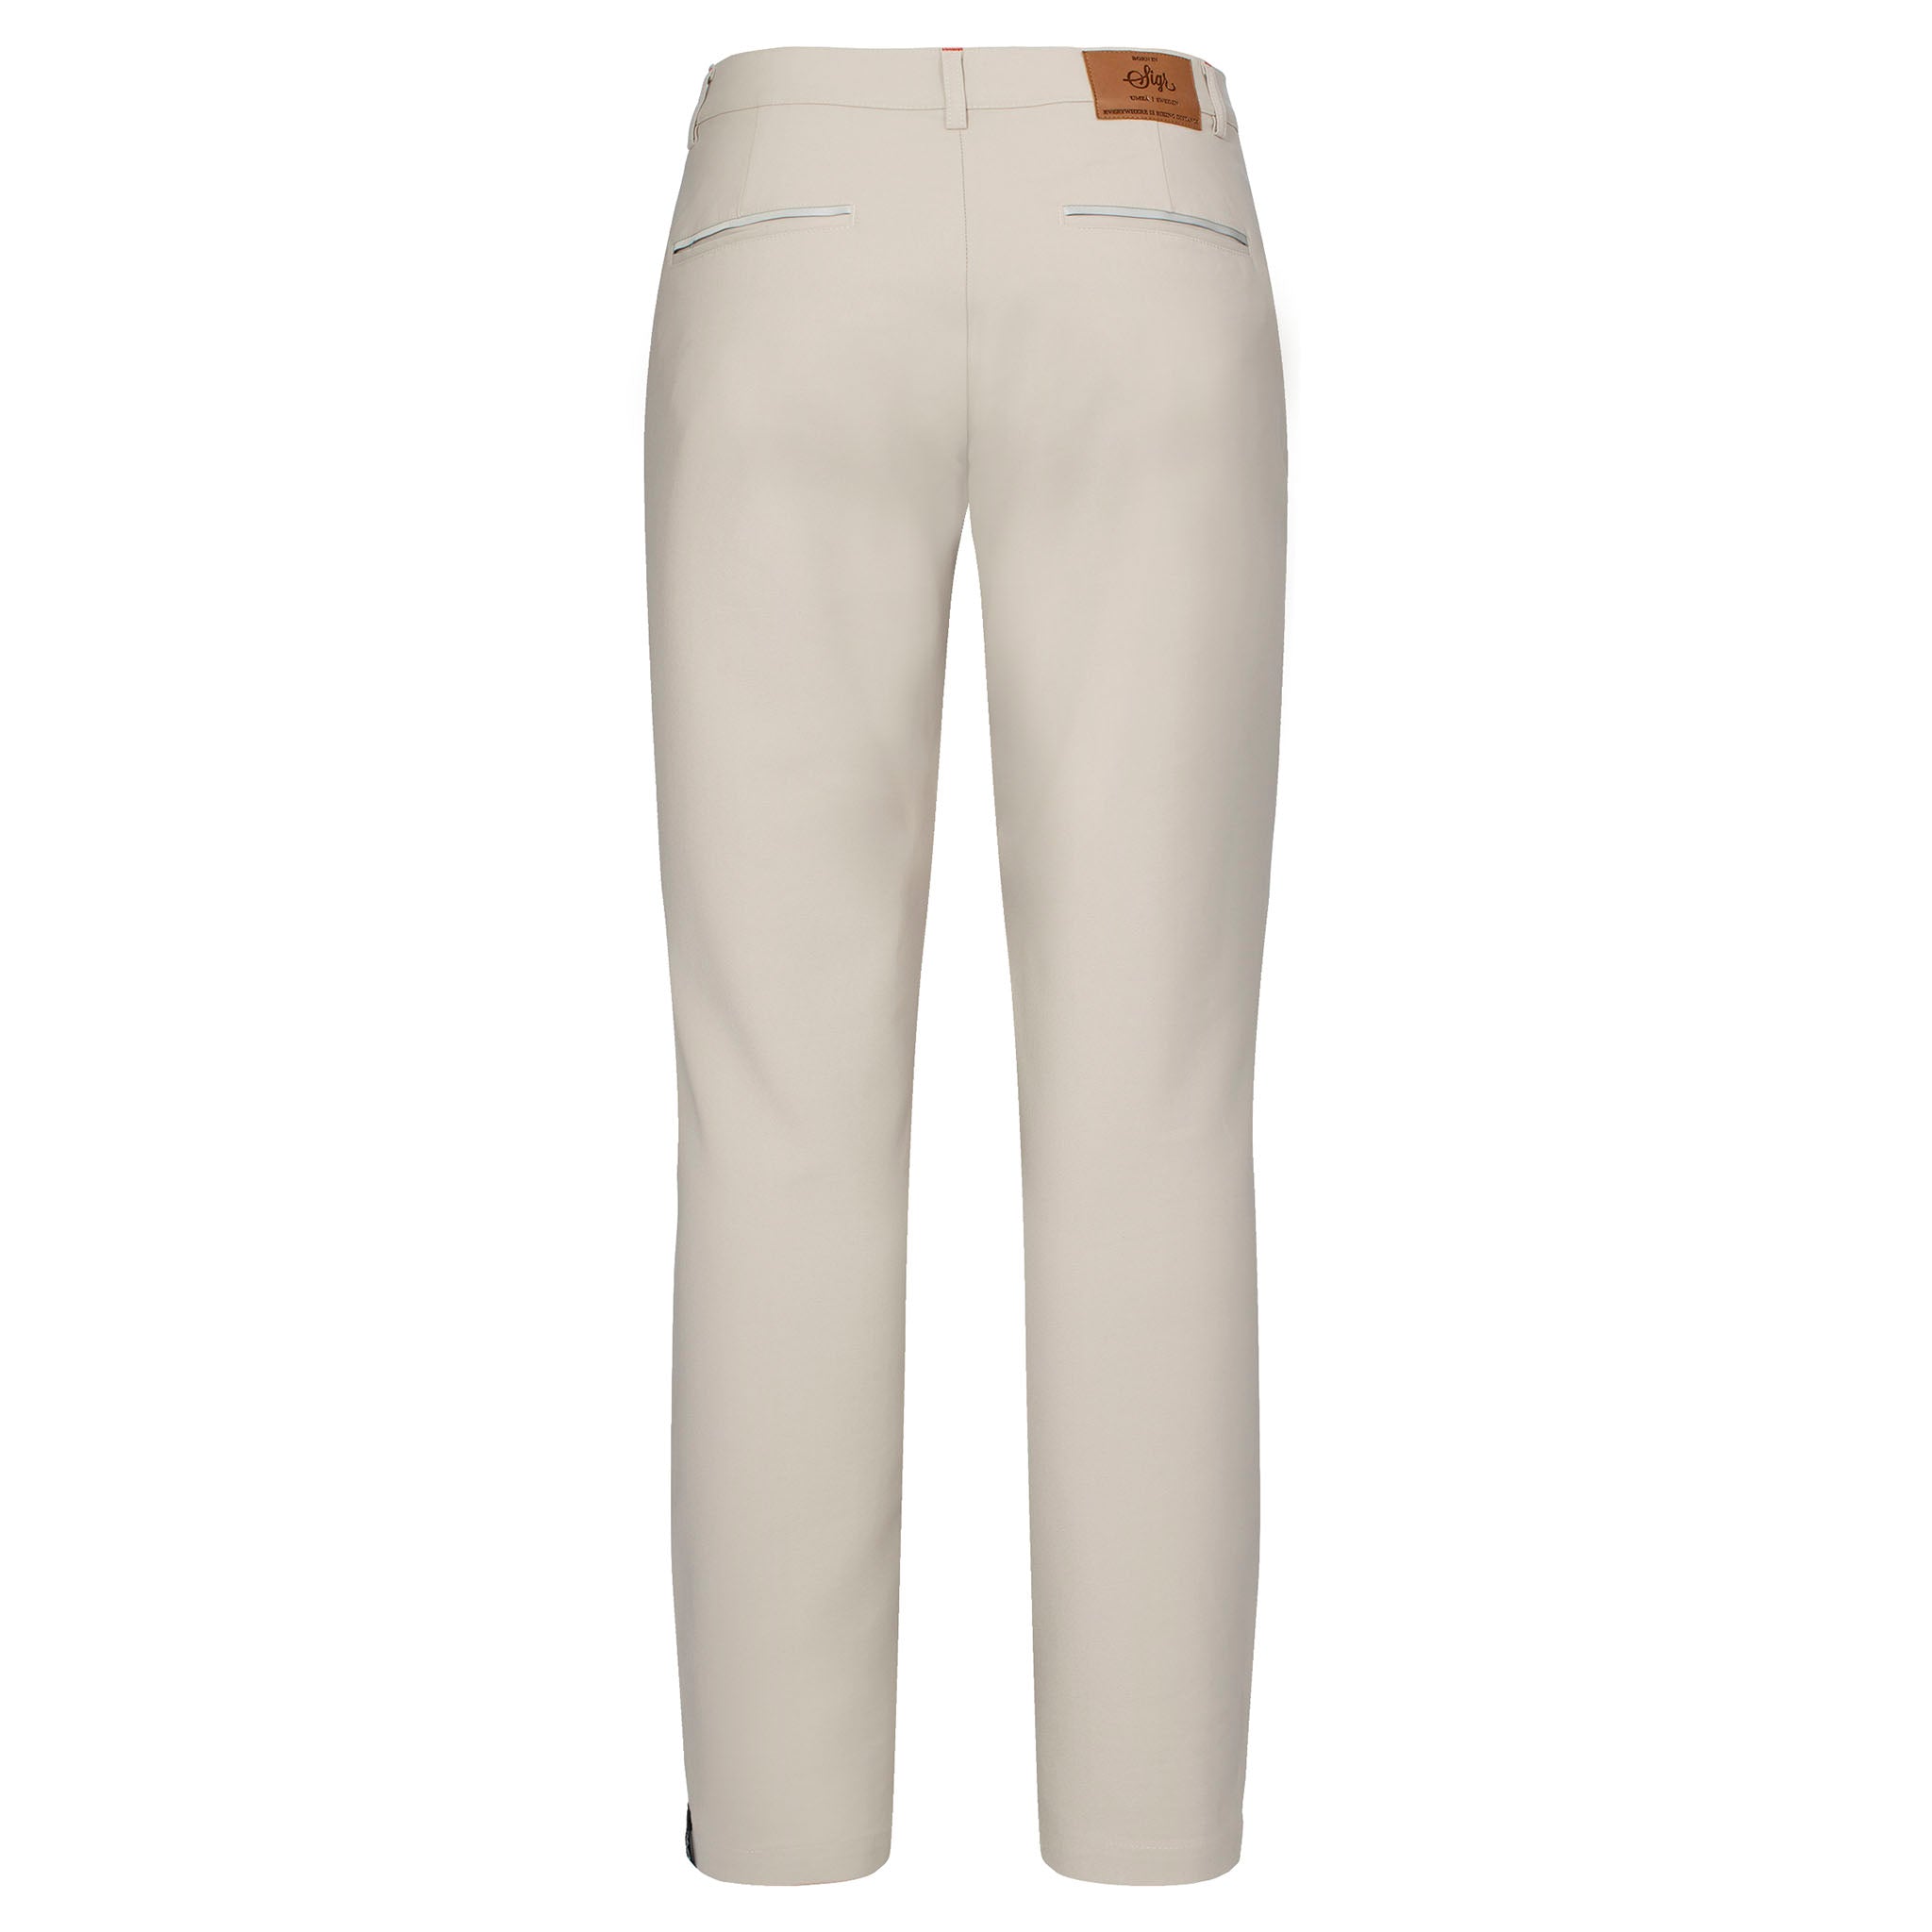 Riksvag 99 - Road Cycling Chinos in Khaki for Women